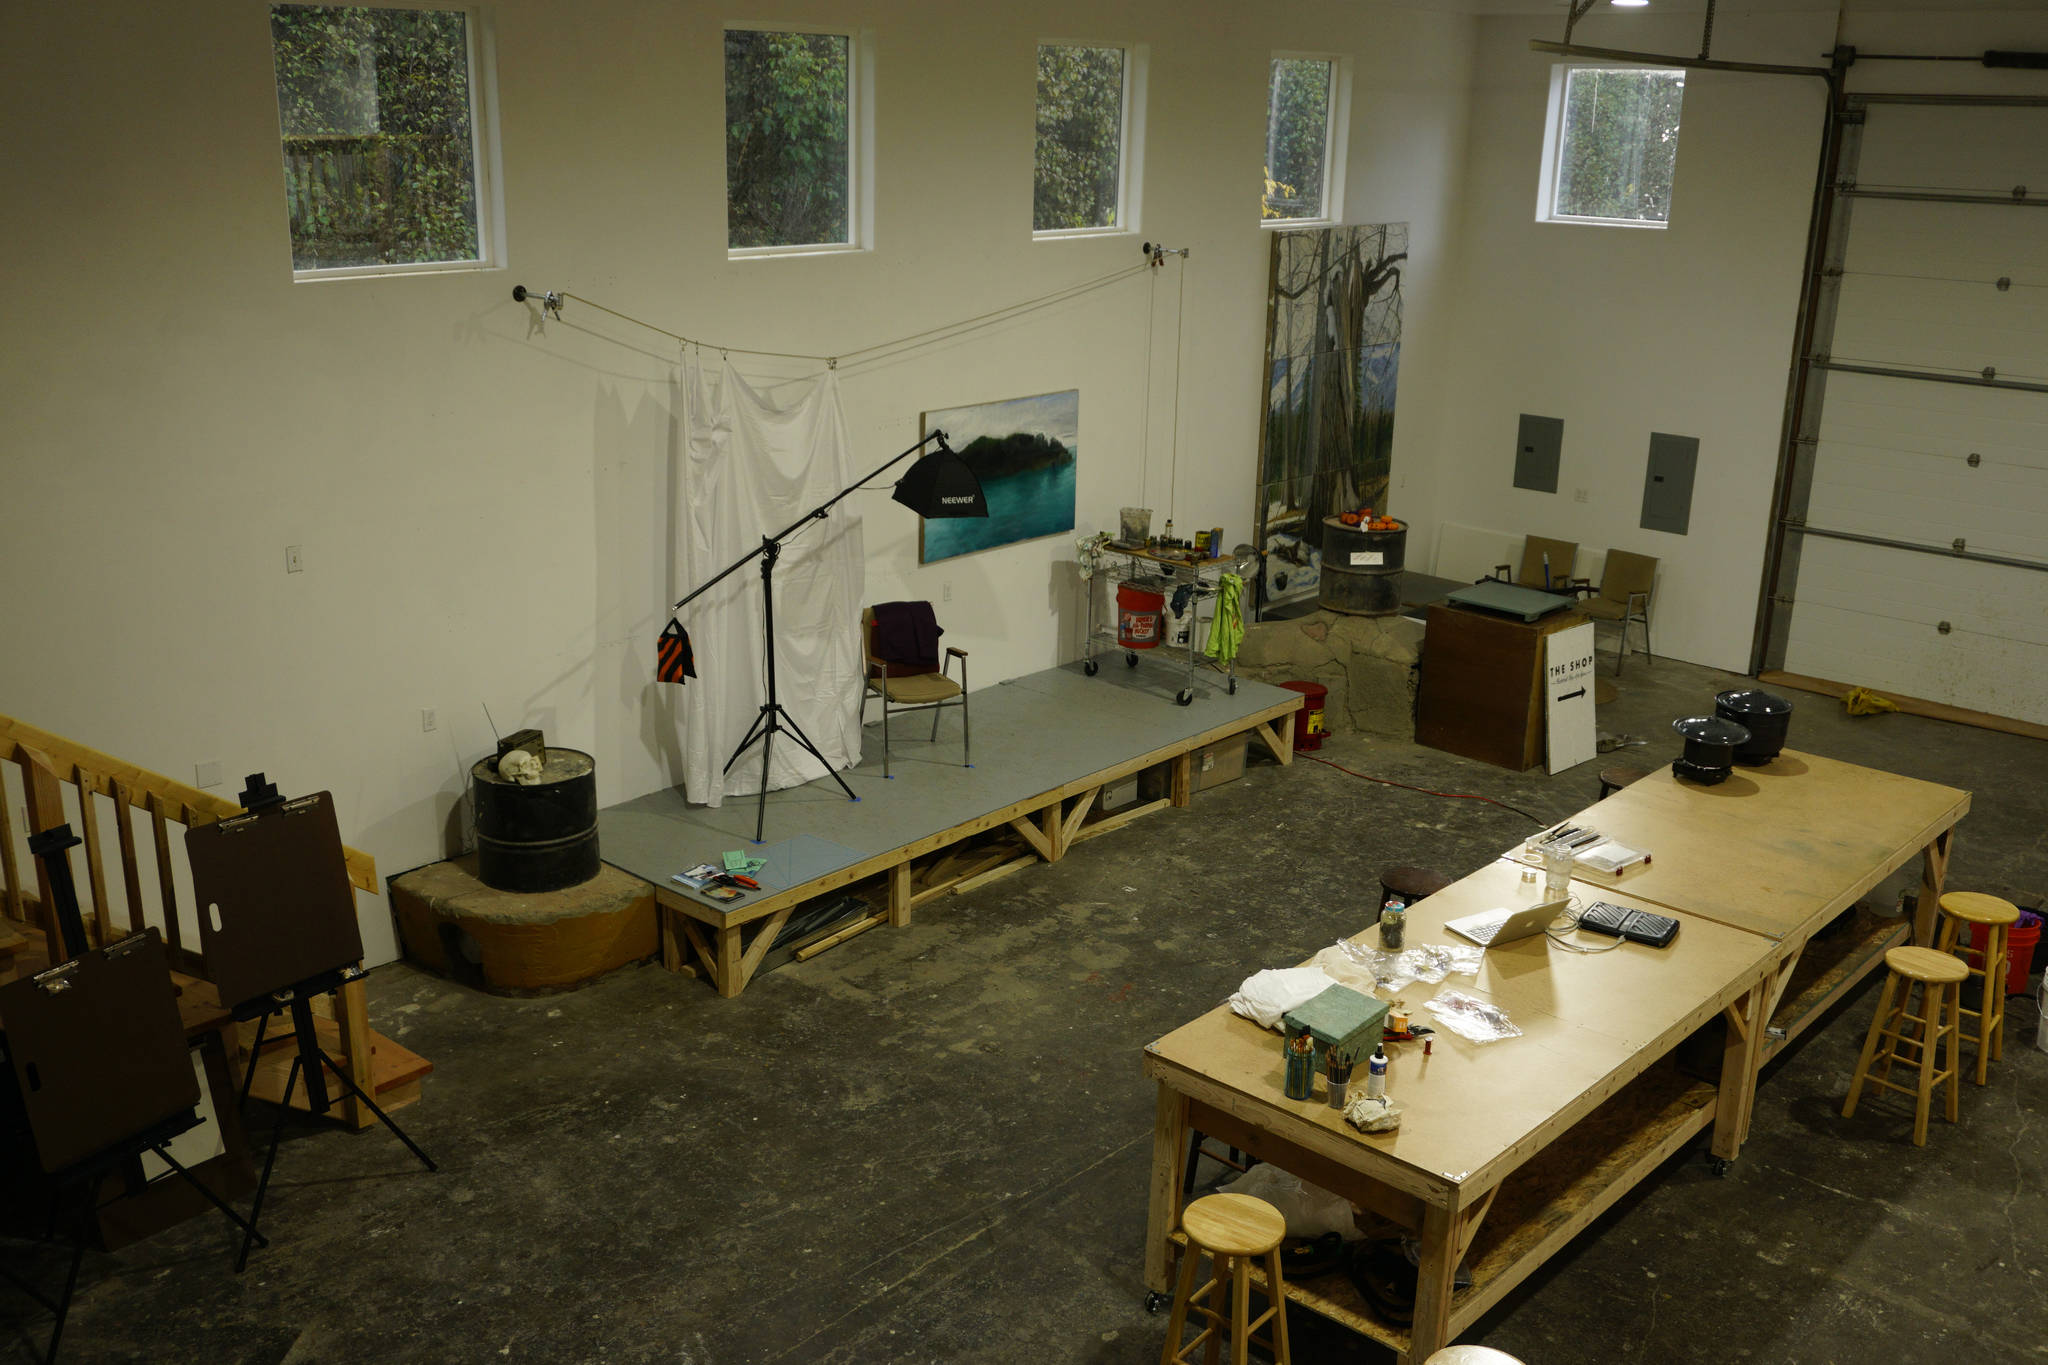 A view from the upper loft of The Shop, shown here Tuesday, Oct. 16, 2018, shows a posing platform and classroom space. Elissa and David Pettibone started the art space in August 2018 in Kachemak City, Alaska. (Photo by MIchael Armstrong/Homer News)